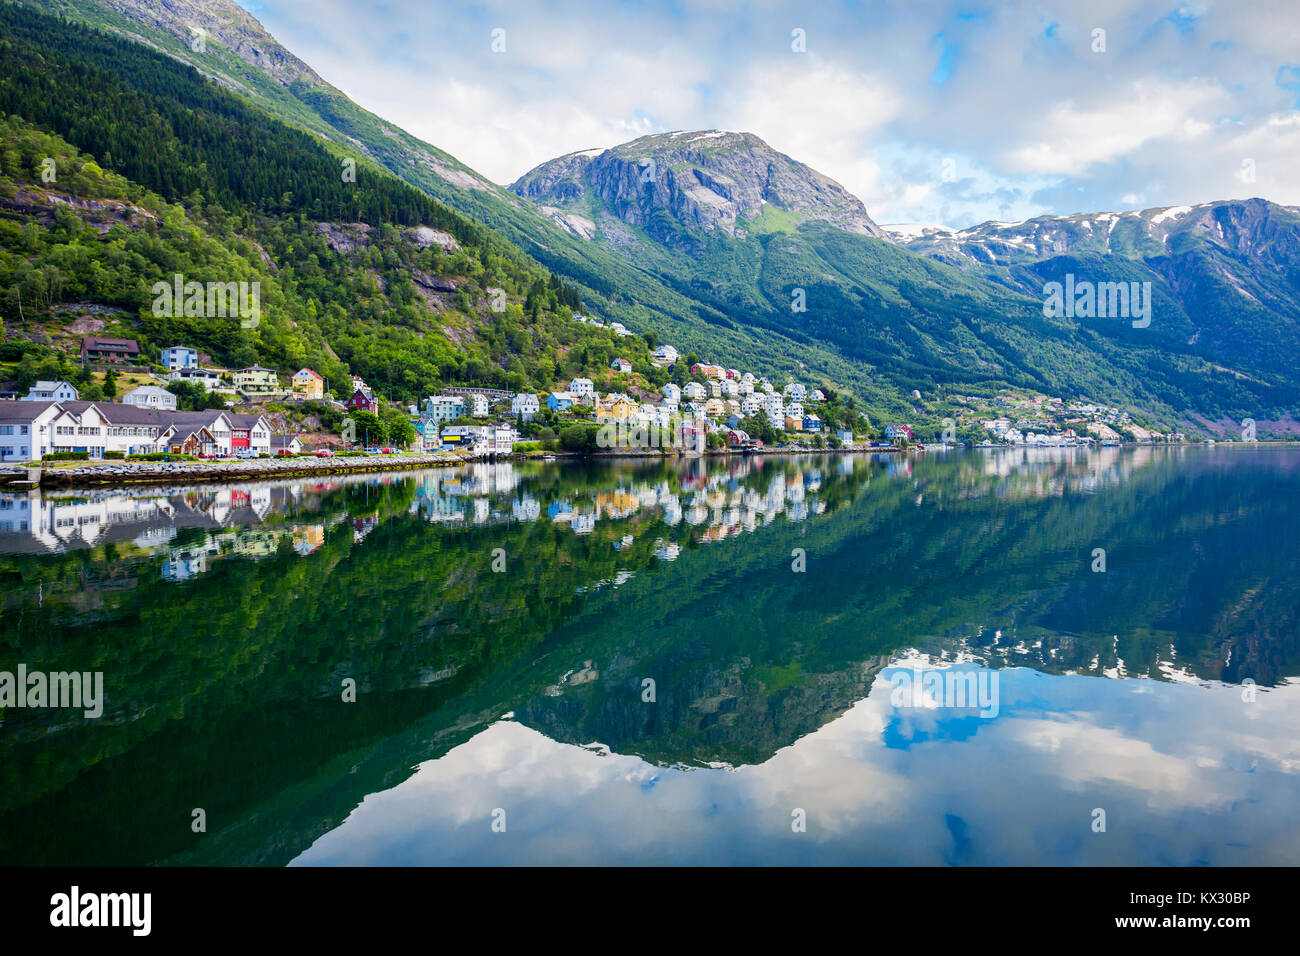 Odda is a town in Odda municipality in Hordaland county, Hardanger district in Norway. Located near Trolltunga rock formation. Stock Photo